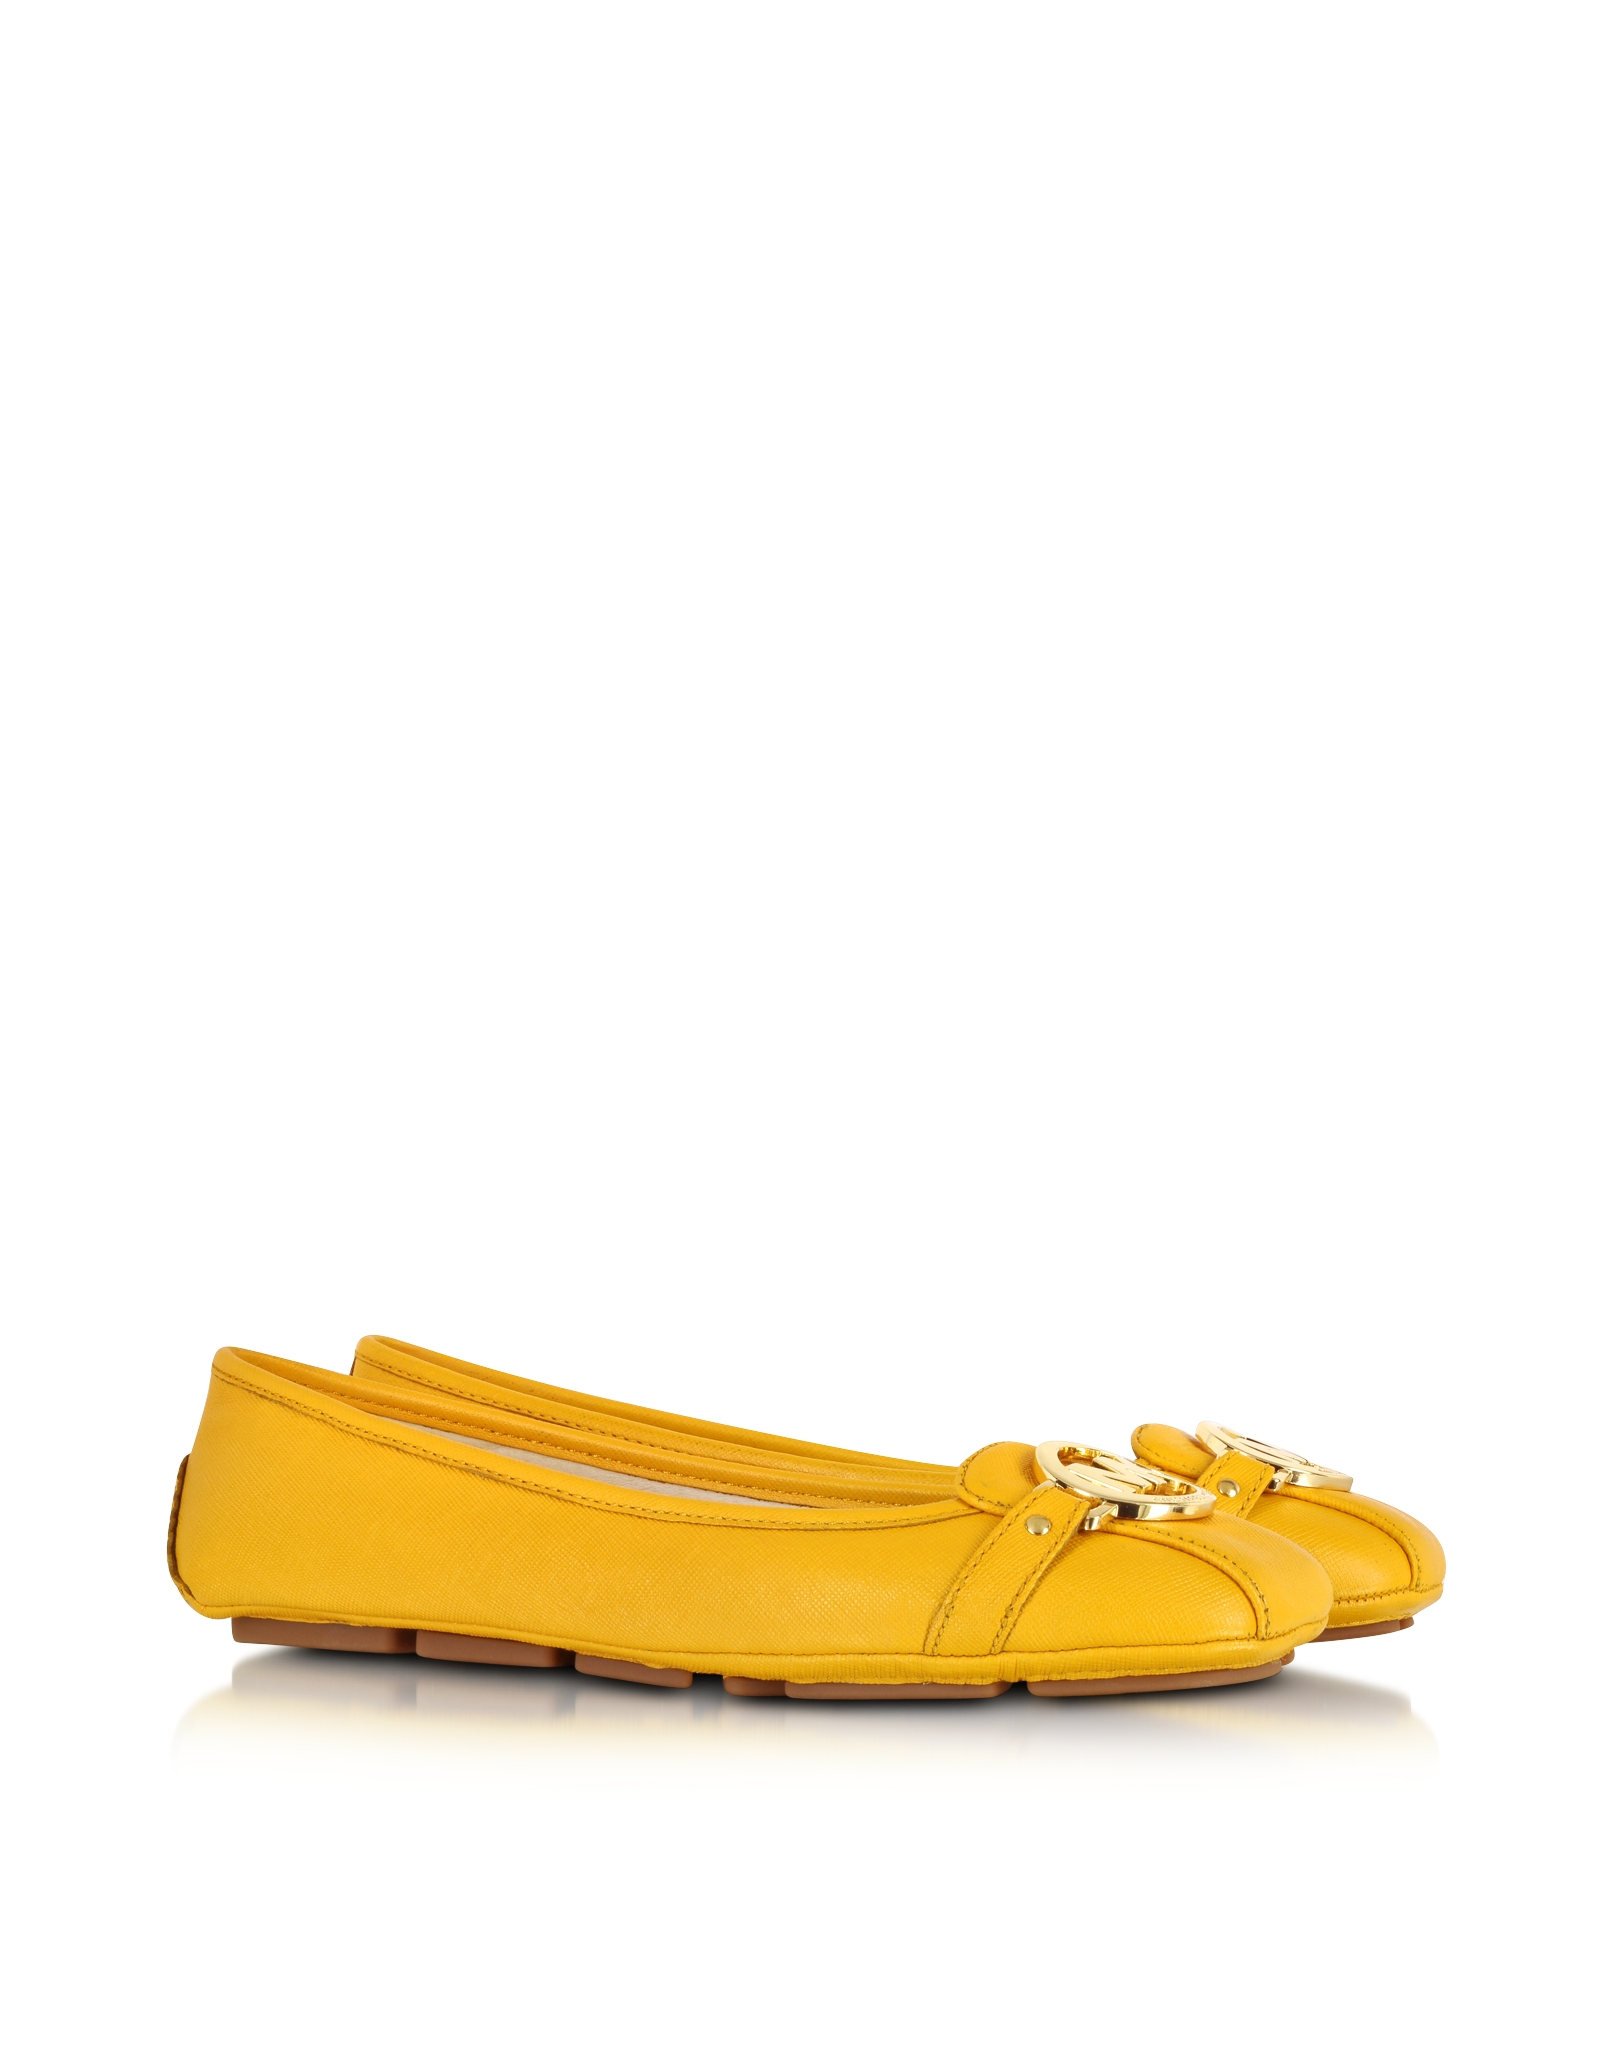 Michael Kors Fulton Sun Saffiano Leather Moccasin in Yellow - Lyst